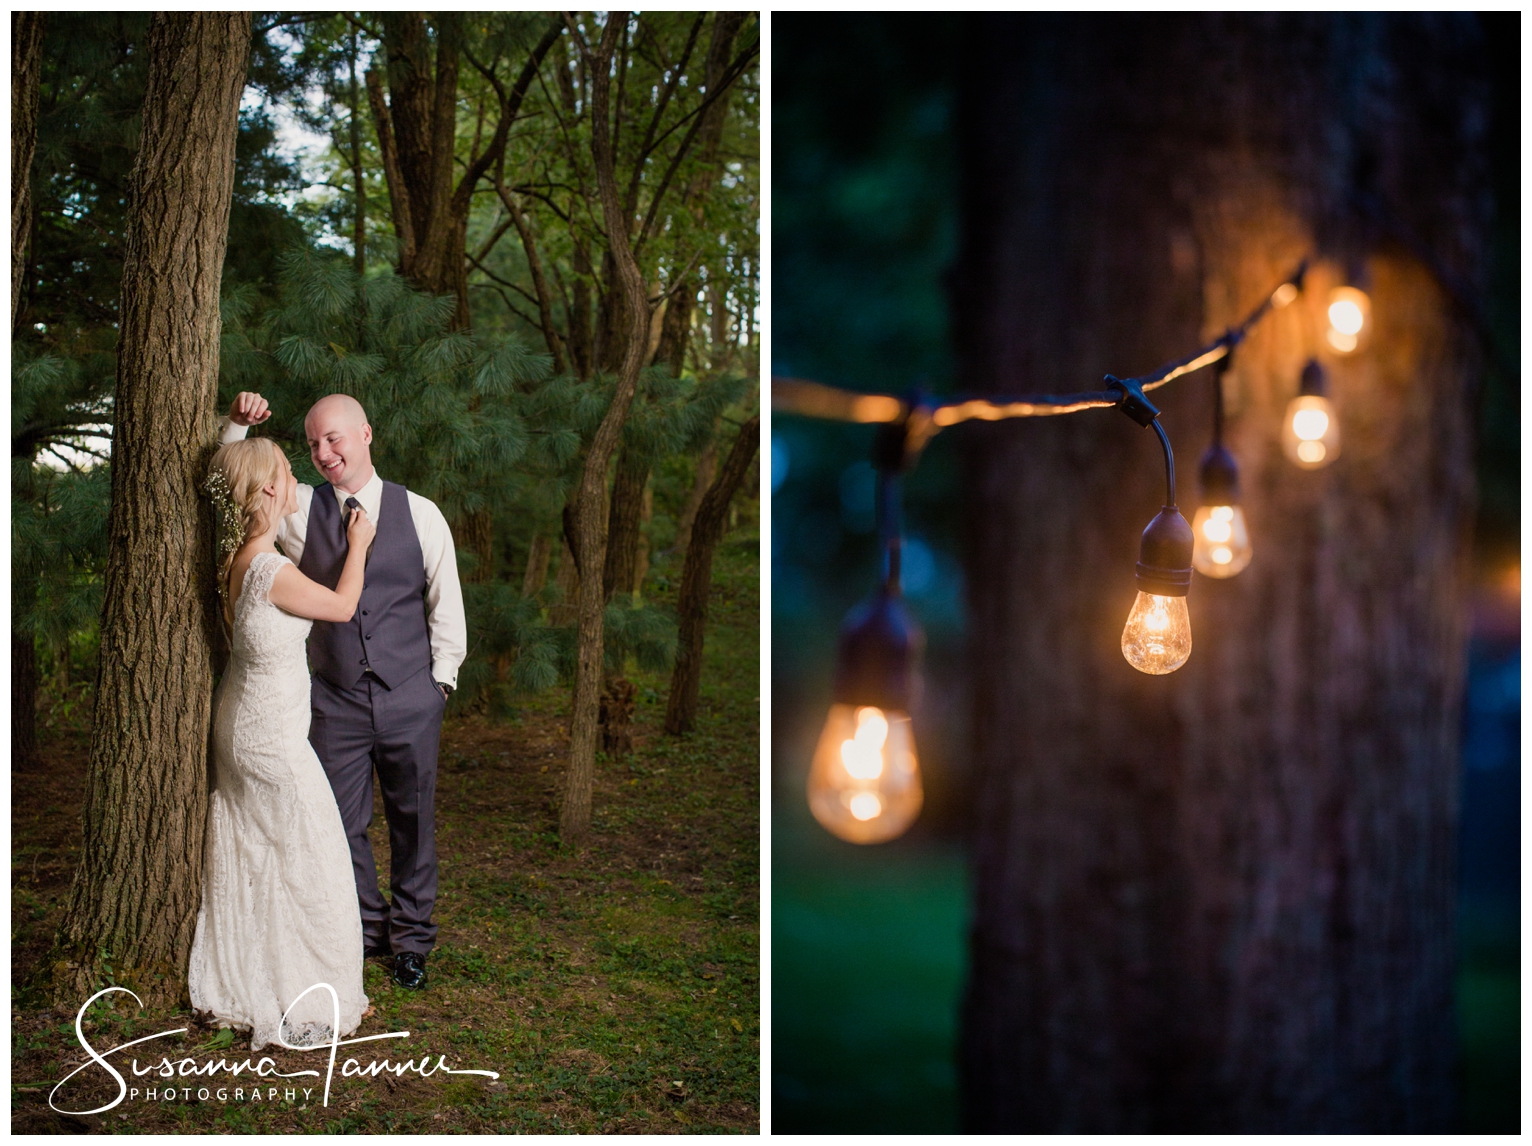 Indianapolis Outdoor Wedding, bride and groom leaning against pine tree, globe outdoor string lights